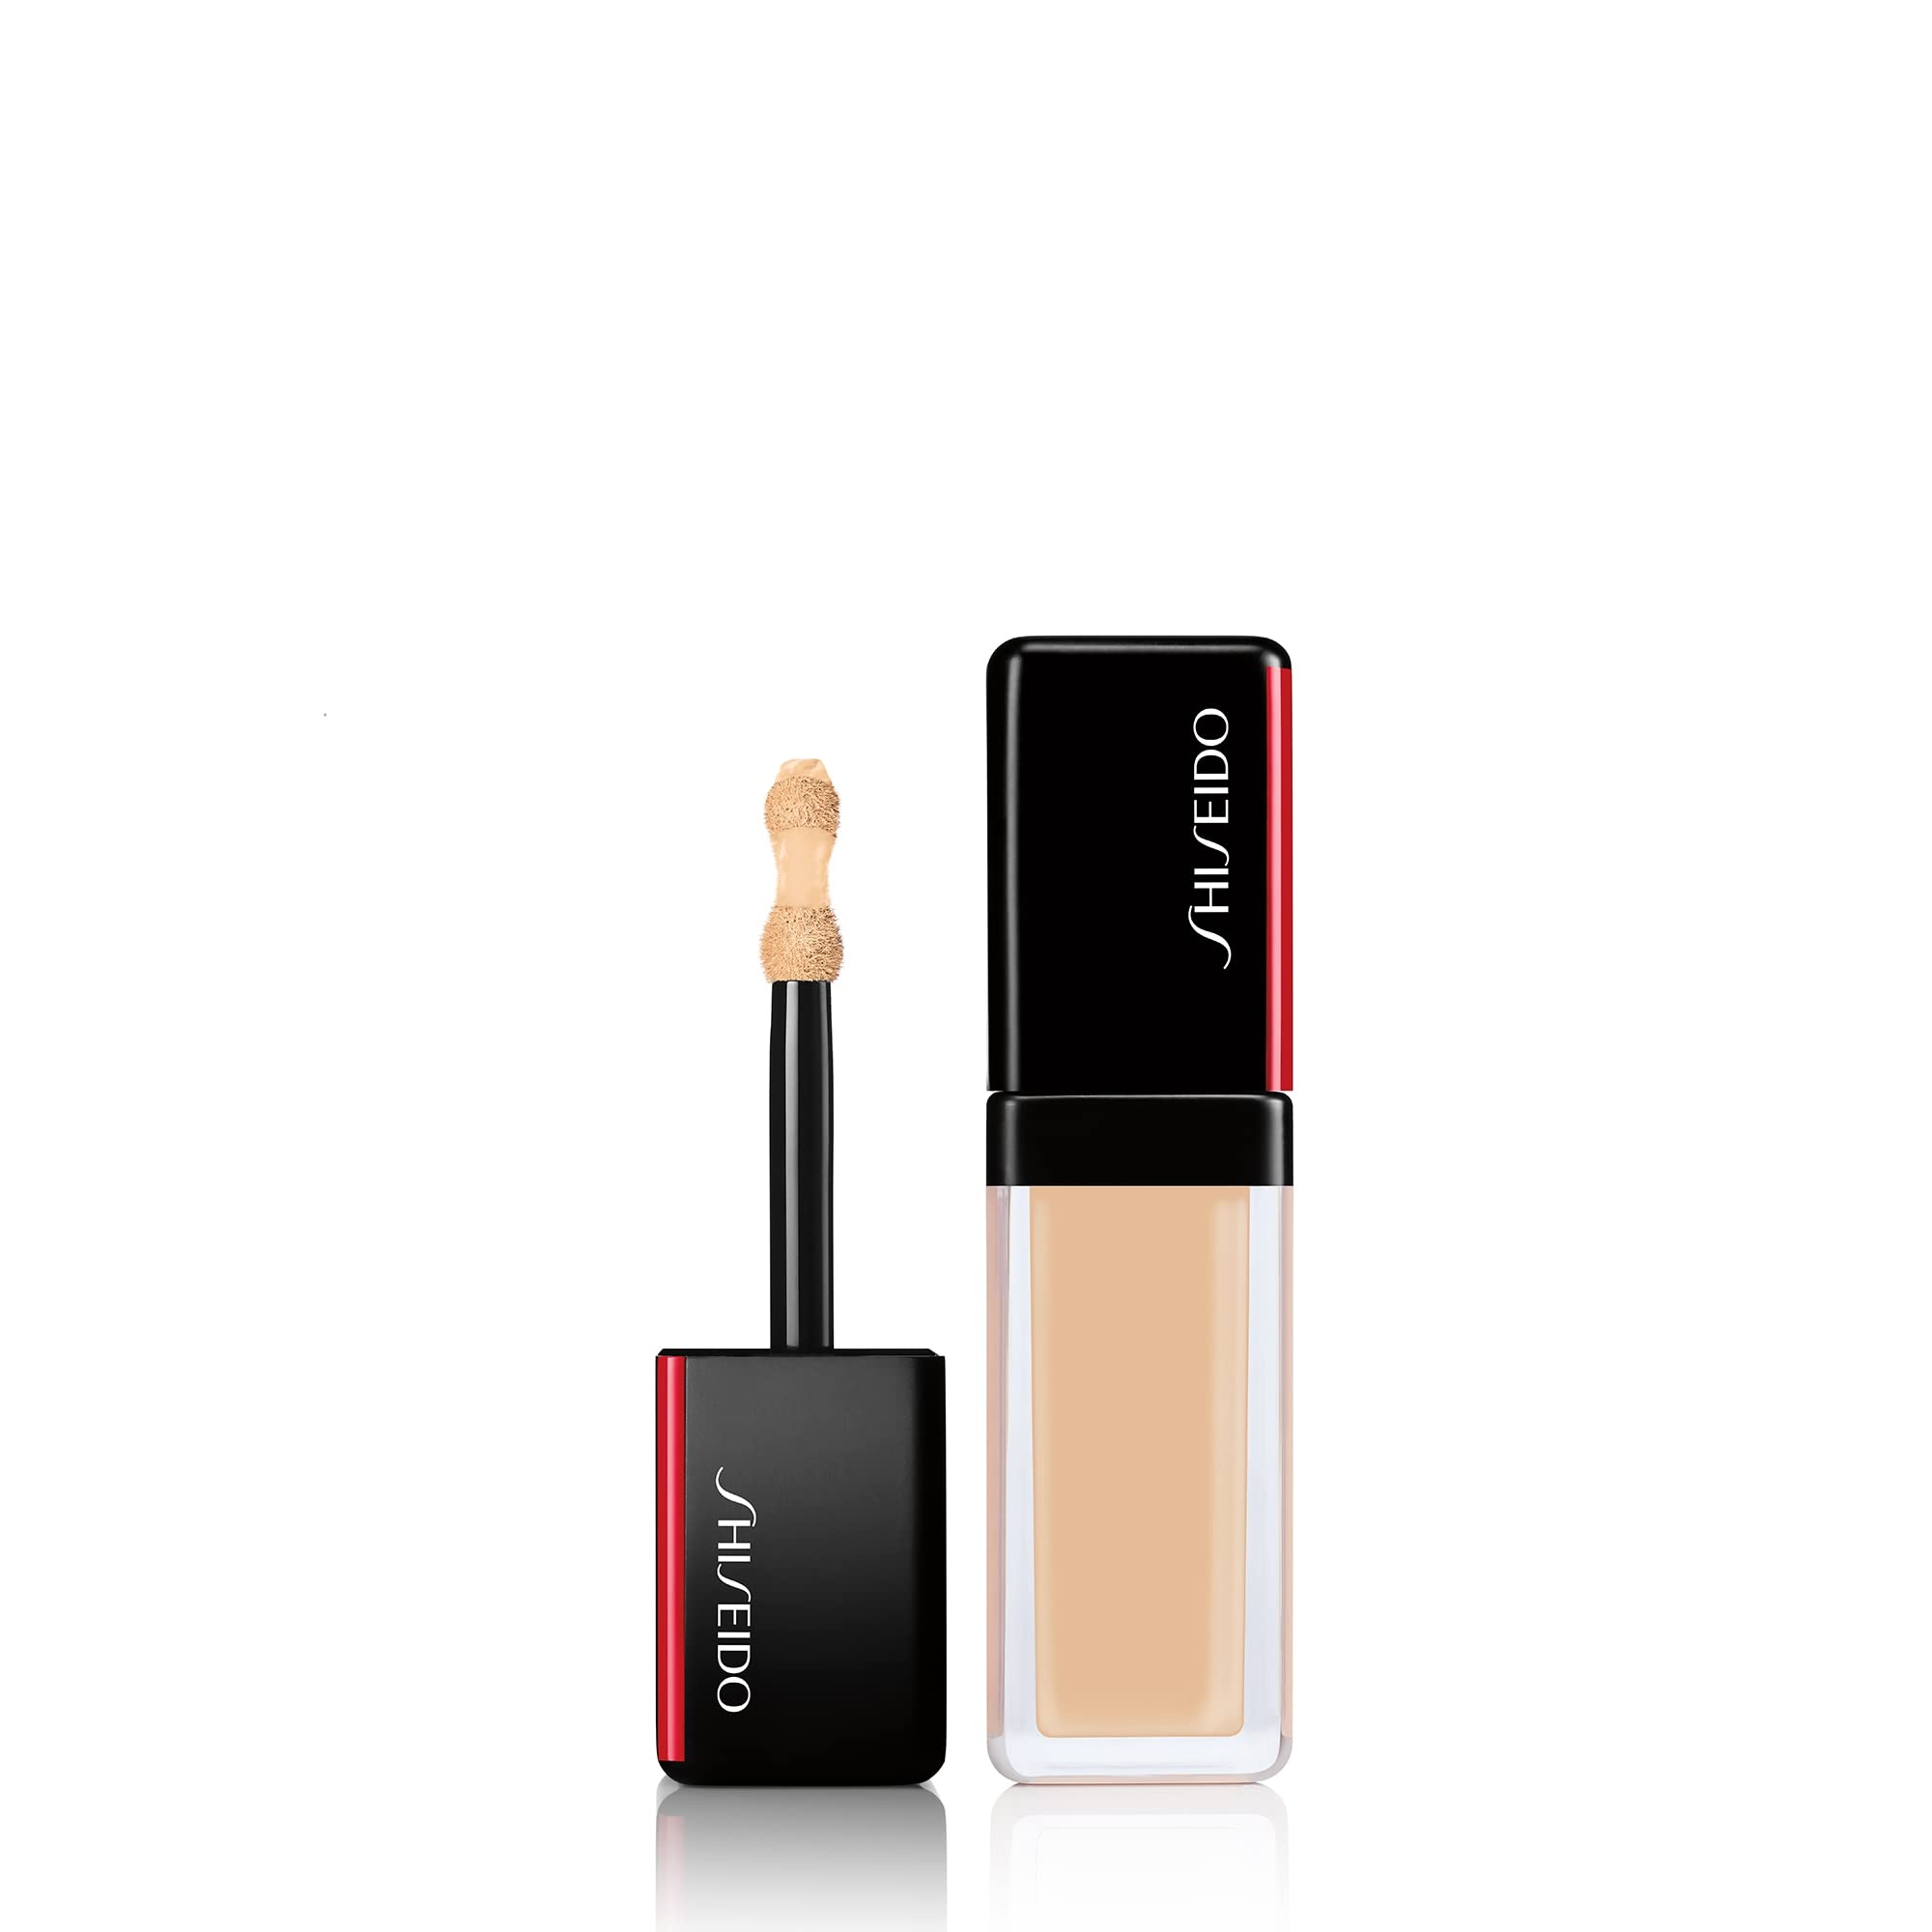 Shiseido Synchro Skin Self-Refreshing Concealer, Light 202 - Medium-to-Full Coverage with Natural Finish & Shine Control - 24-Ho